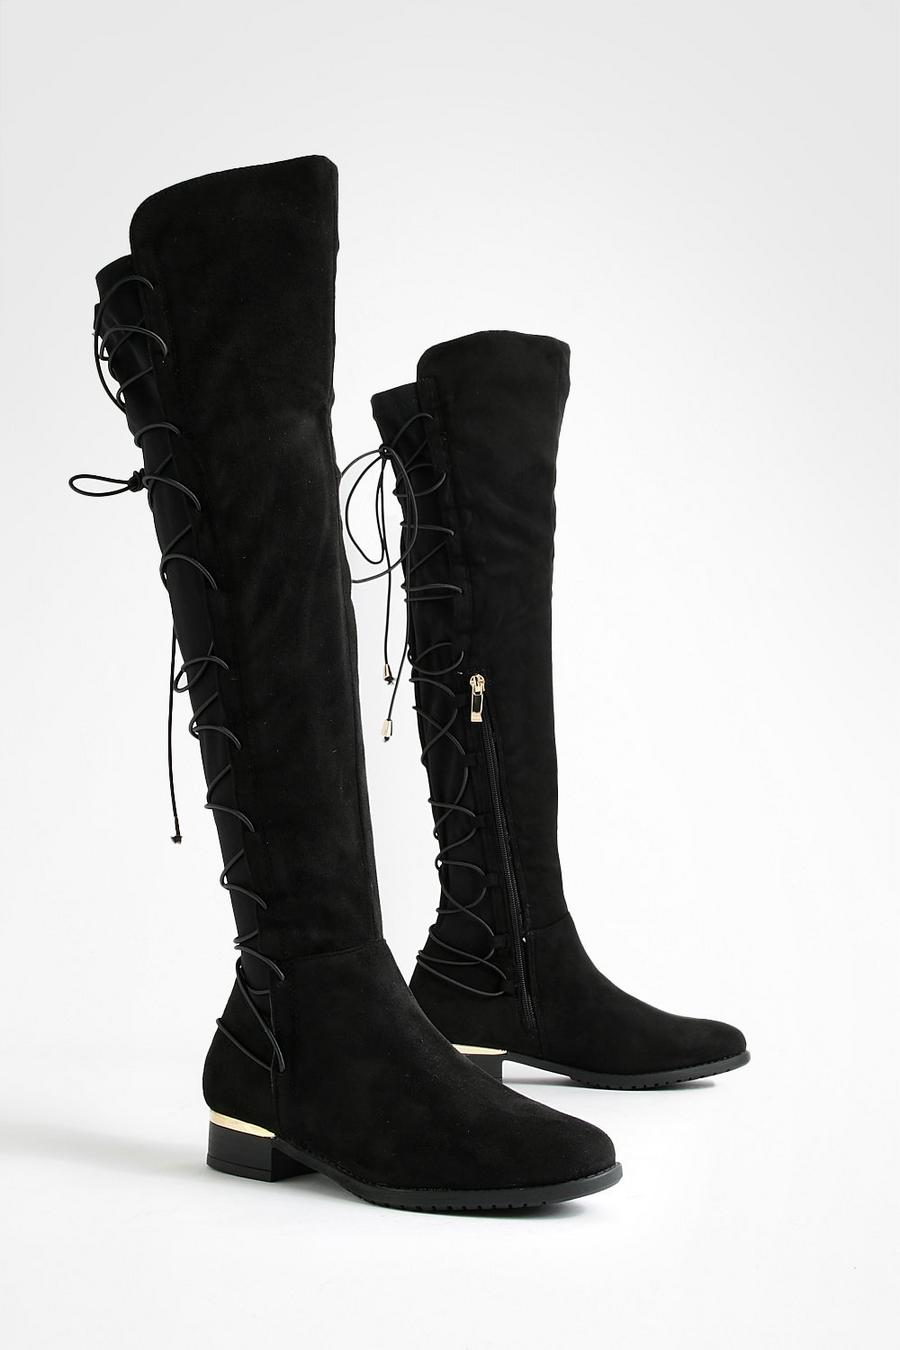 Bungee Lace Knee High Boots | boohoo